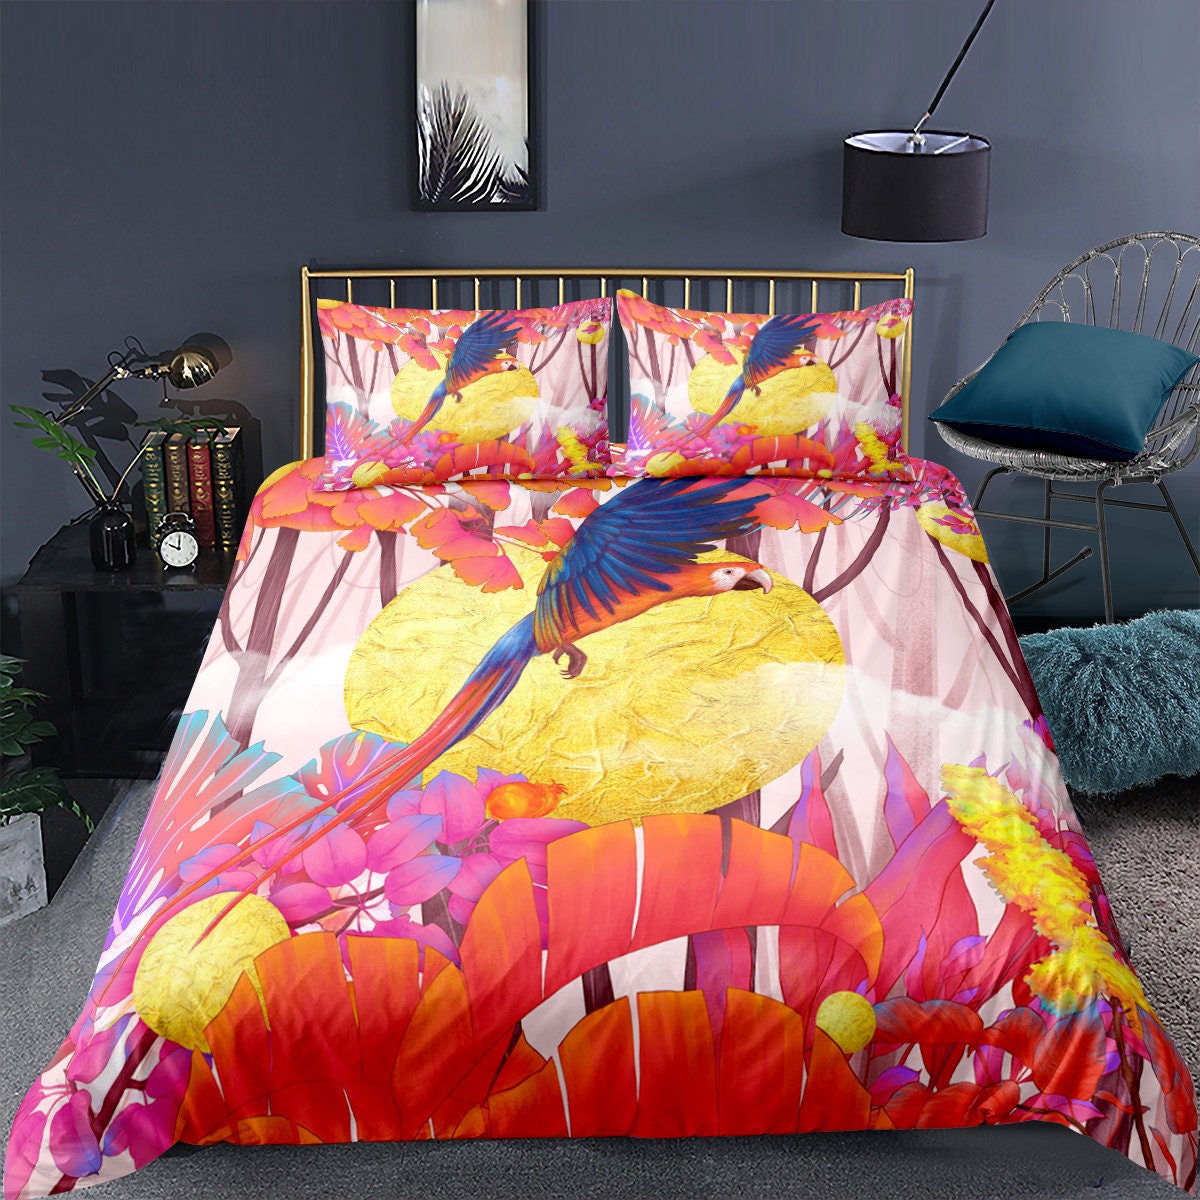 Bedspreads 3 Pcs Flowers and Birds Pattern Duvet Cover Garden Style Design Pink Bedding Quilt Cover Set with Zipper Closure Red Yellow Twin